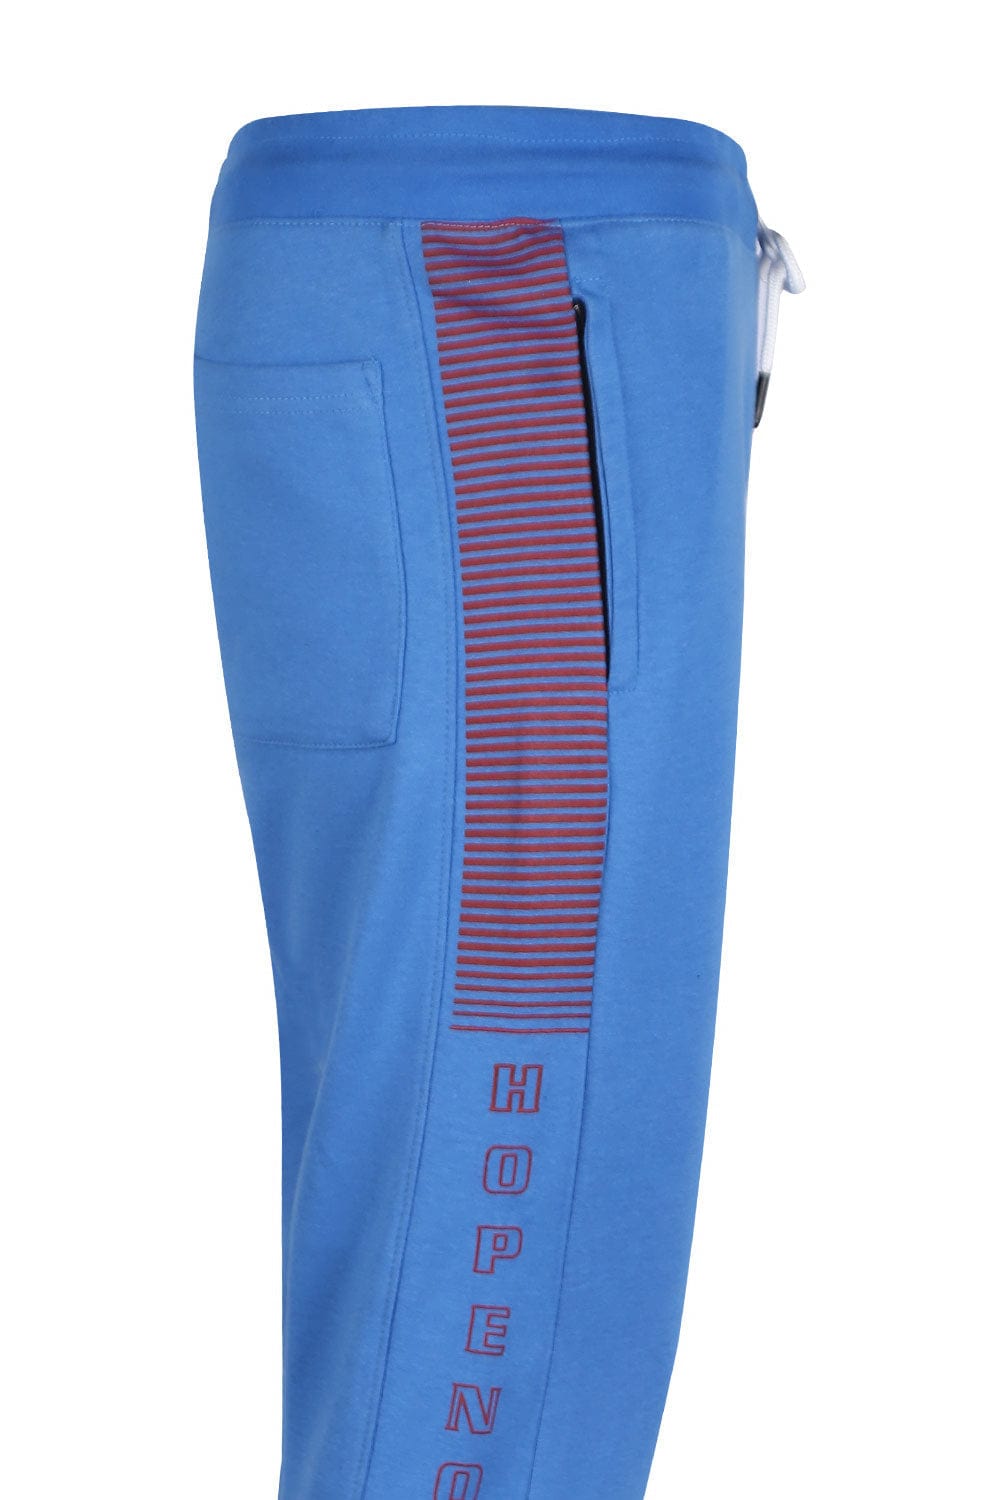 Hope Not Out by Shahid Afridi Men Trouser Fashion Graphic Trouser with Cut and Sew Panels